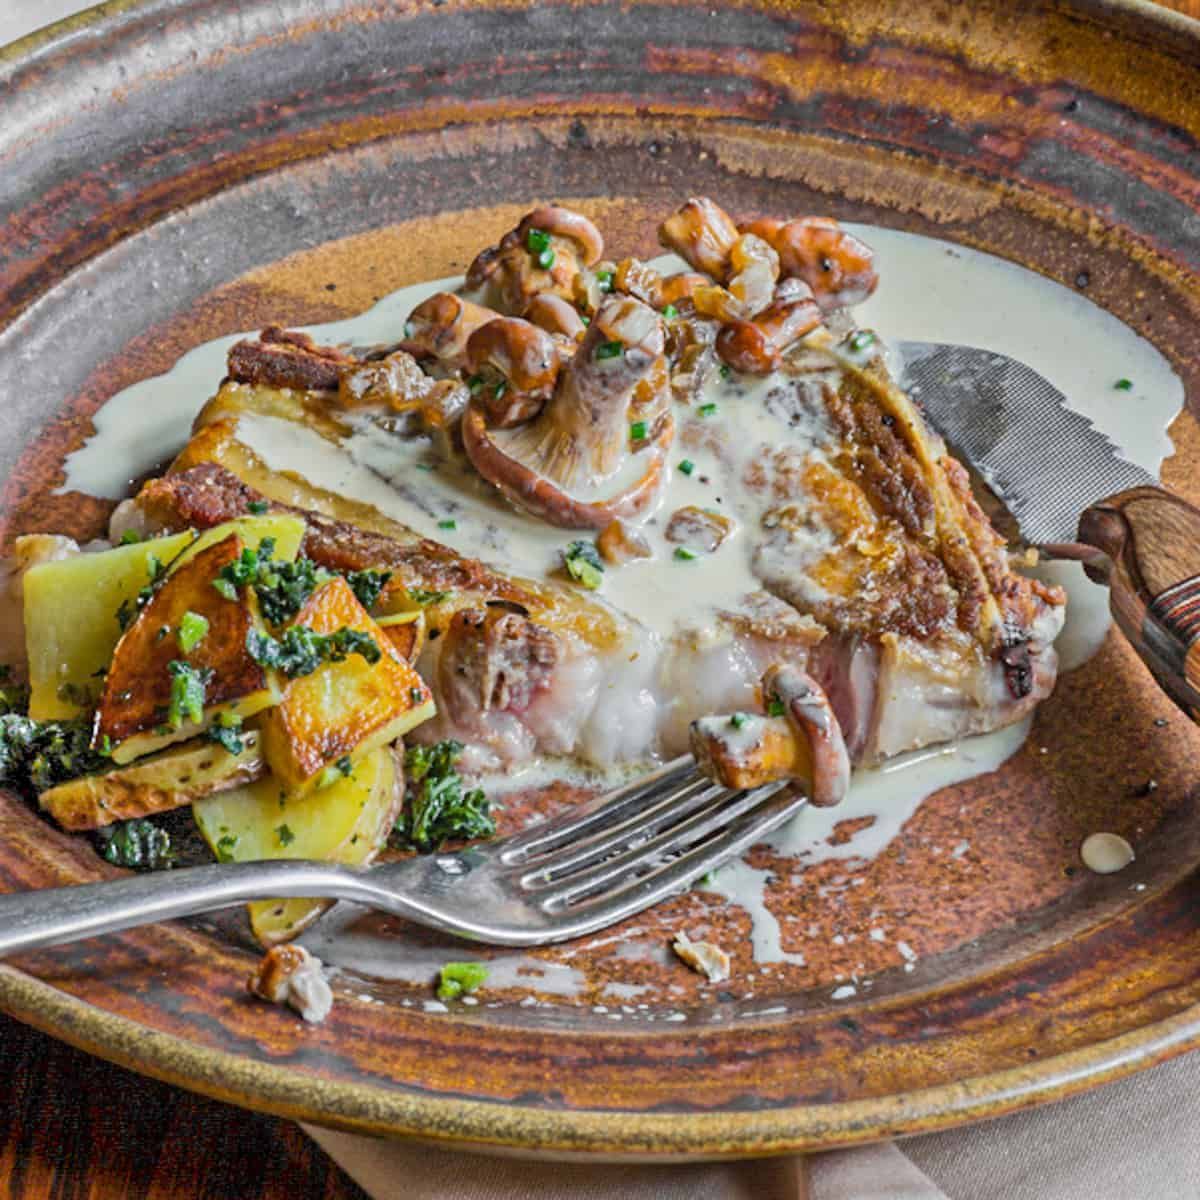 Mangalitsa Pork Chops With Chanterelle-Skyr Sauce buff.ly/3JLFI9E (via Forager Chef) 'Mangalitsas have a layer of fat on their back so big it deserves its own zip code.' For local #Mangalitsa - Winfield Farm in #Buellton buff.ly/3EH5SIE